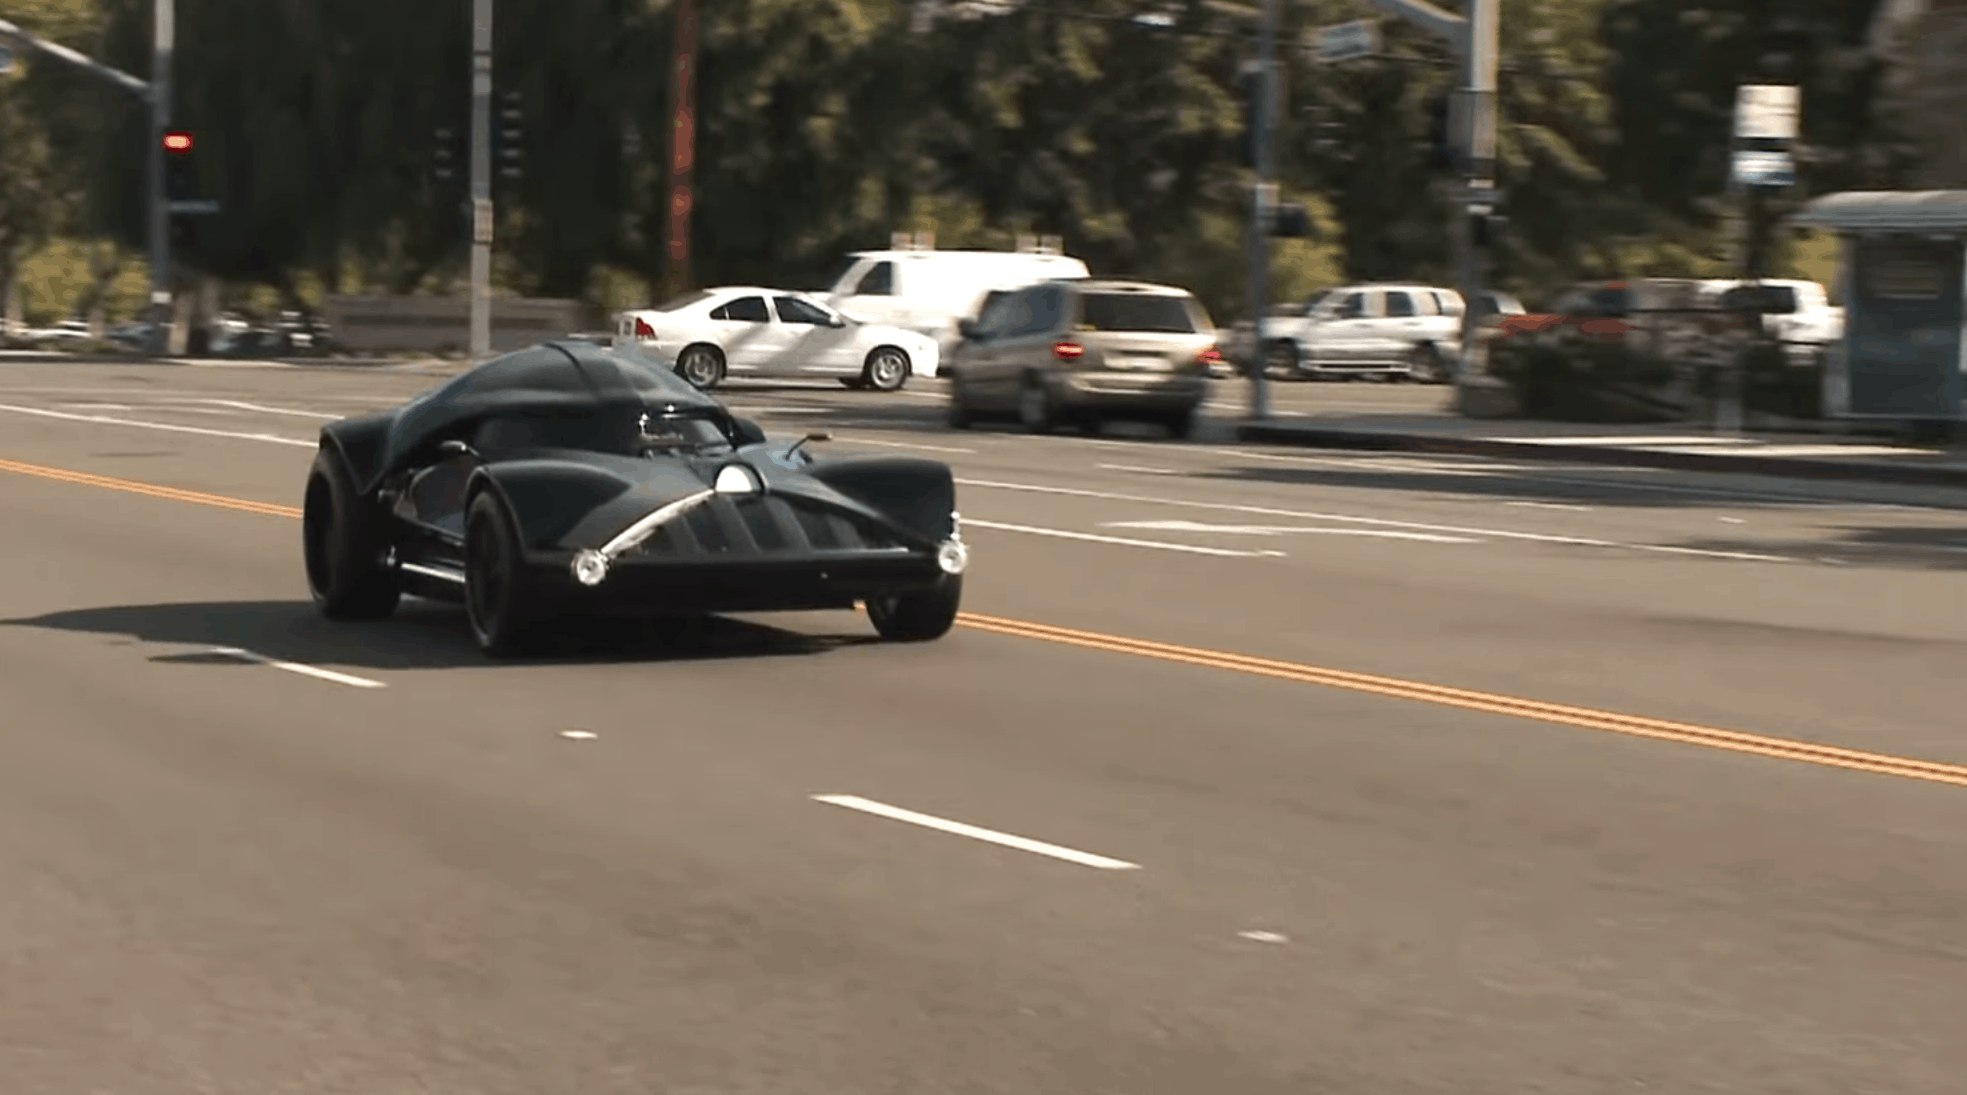 darth vader's car - full-size and driveable